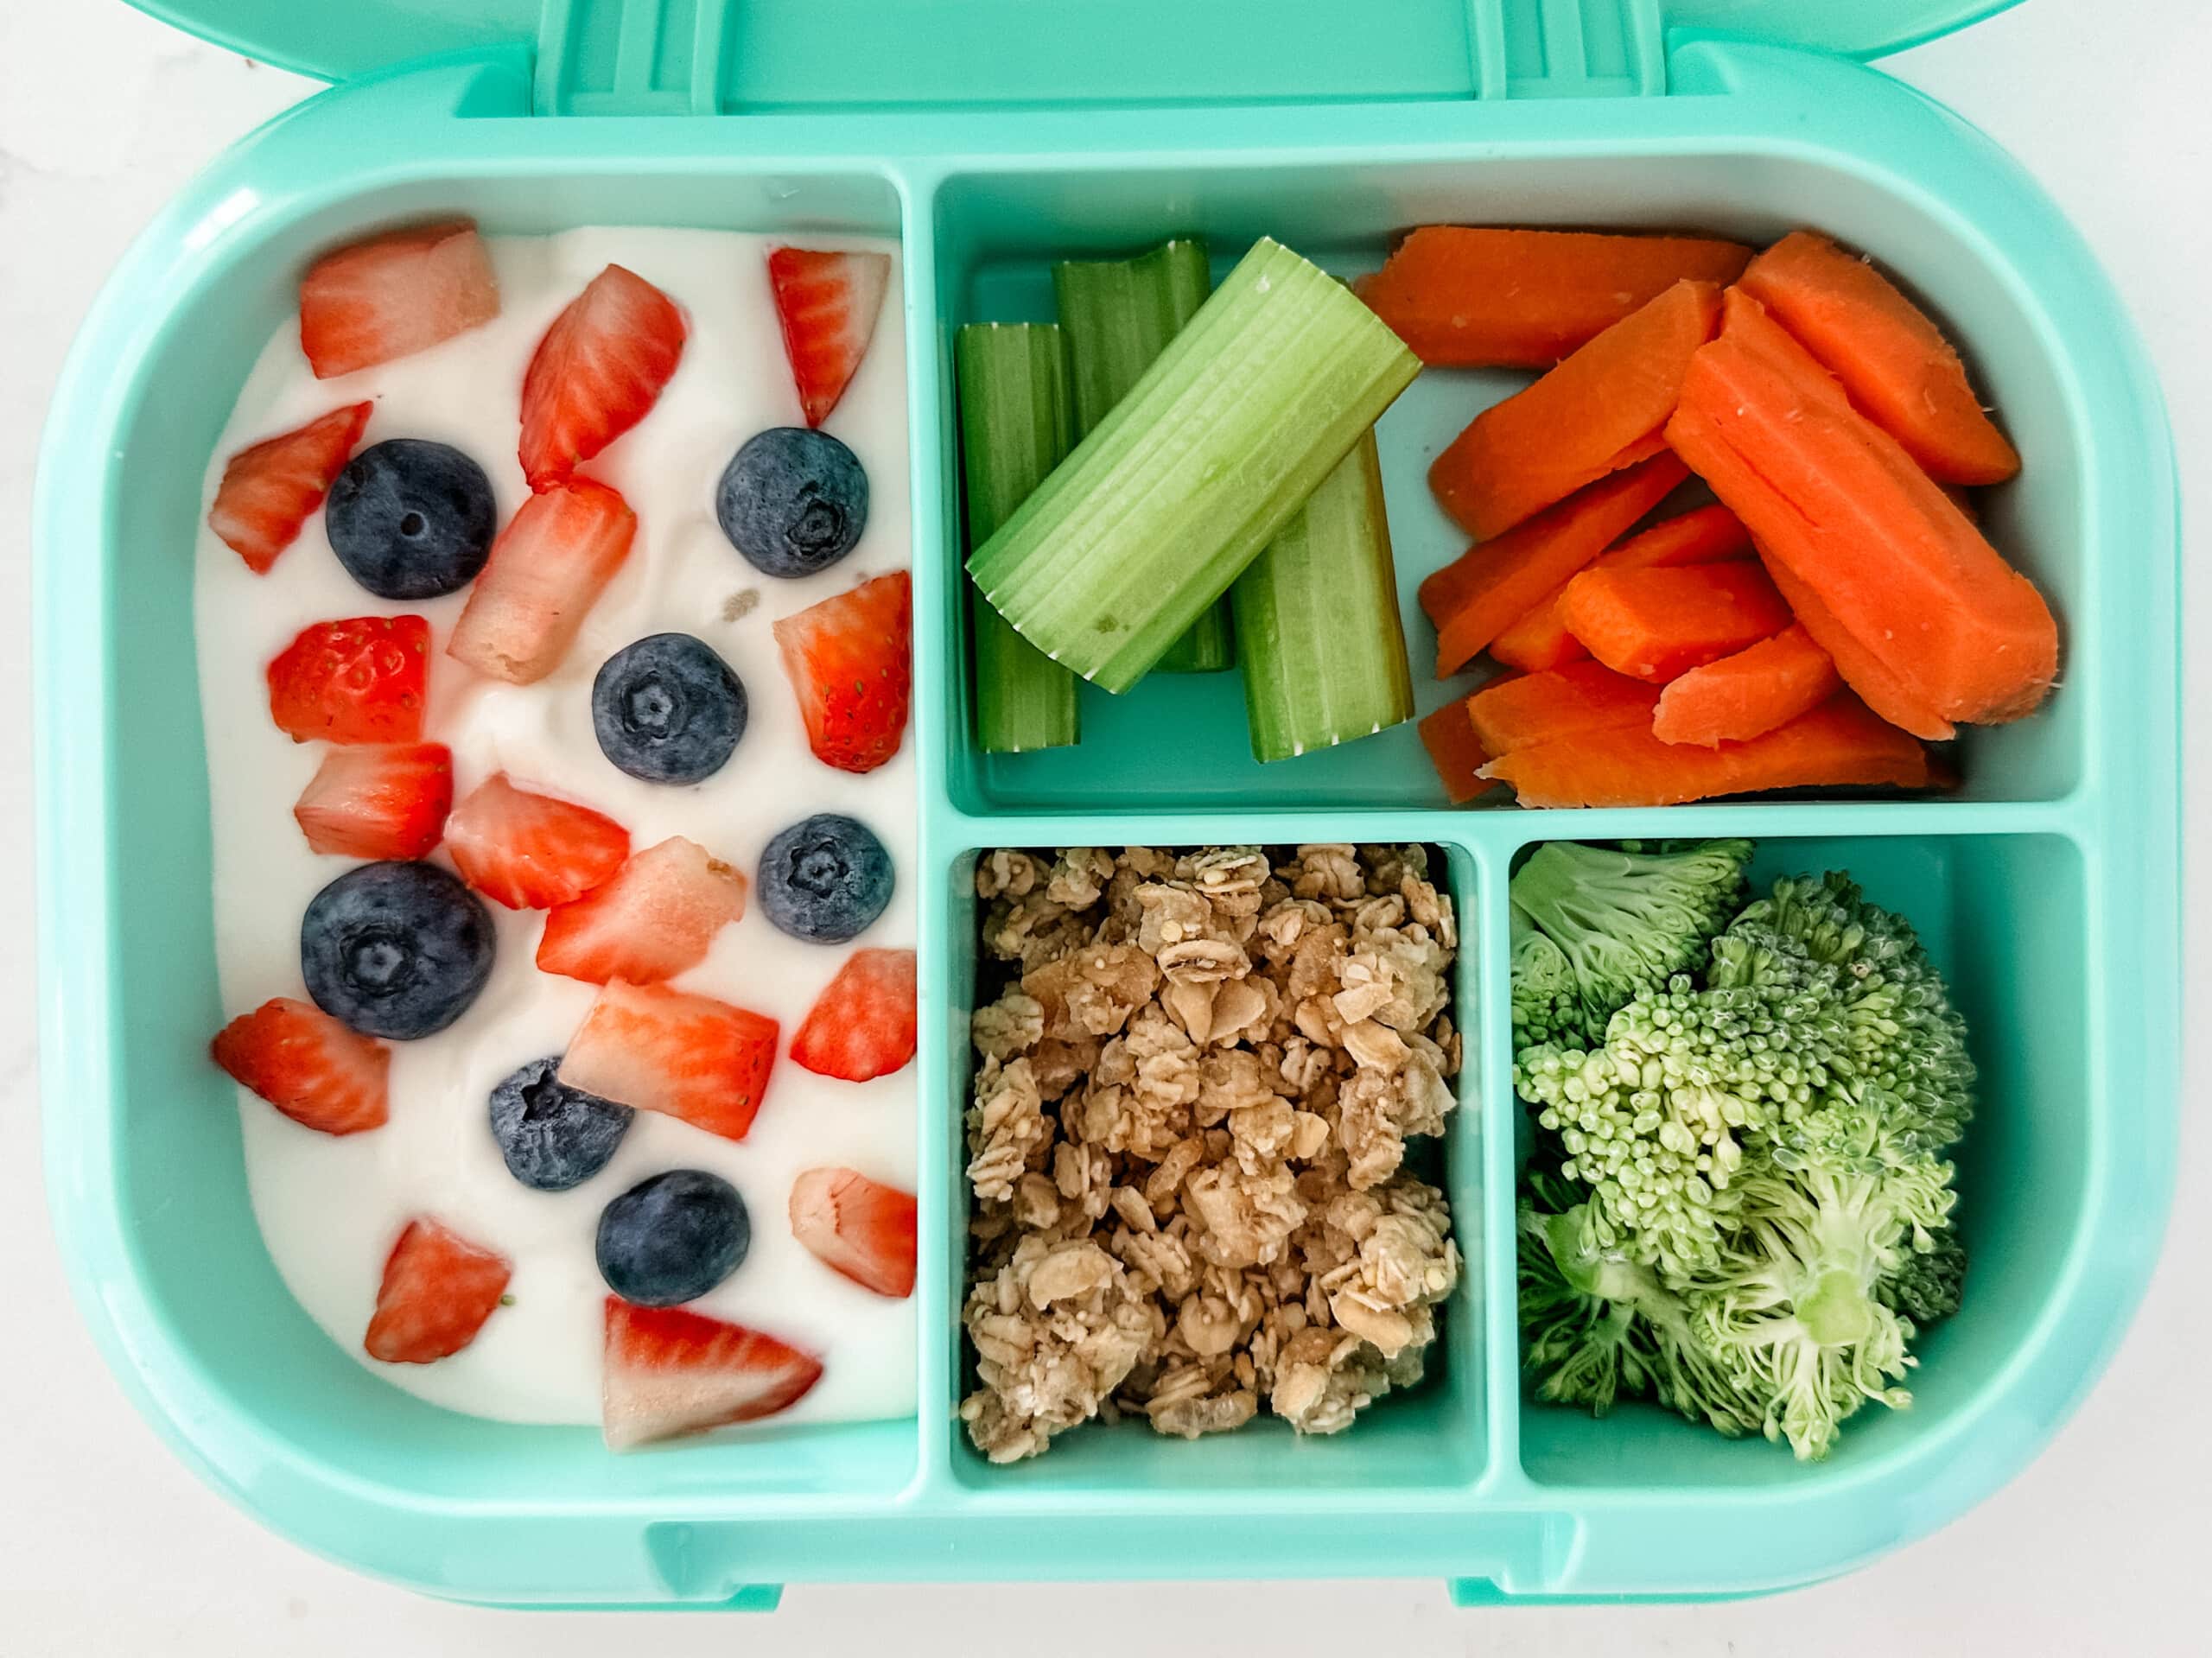 Mint green bento box for kids filled with greek yogurt and berries, granola, broccoli, celery sticks, and carrots